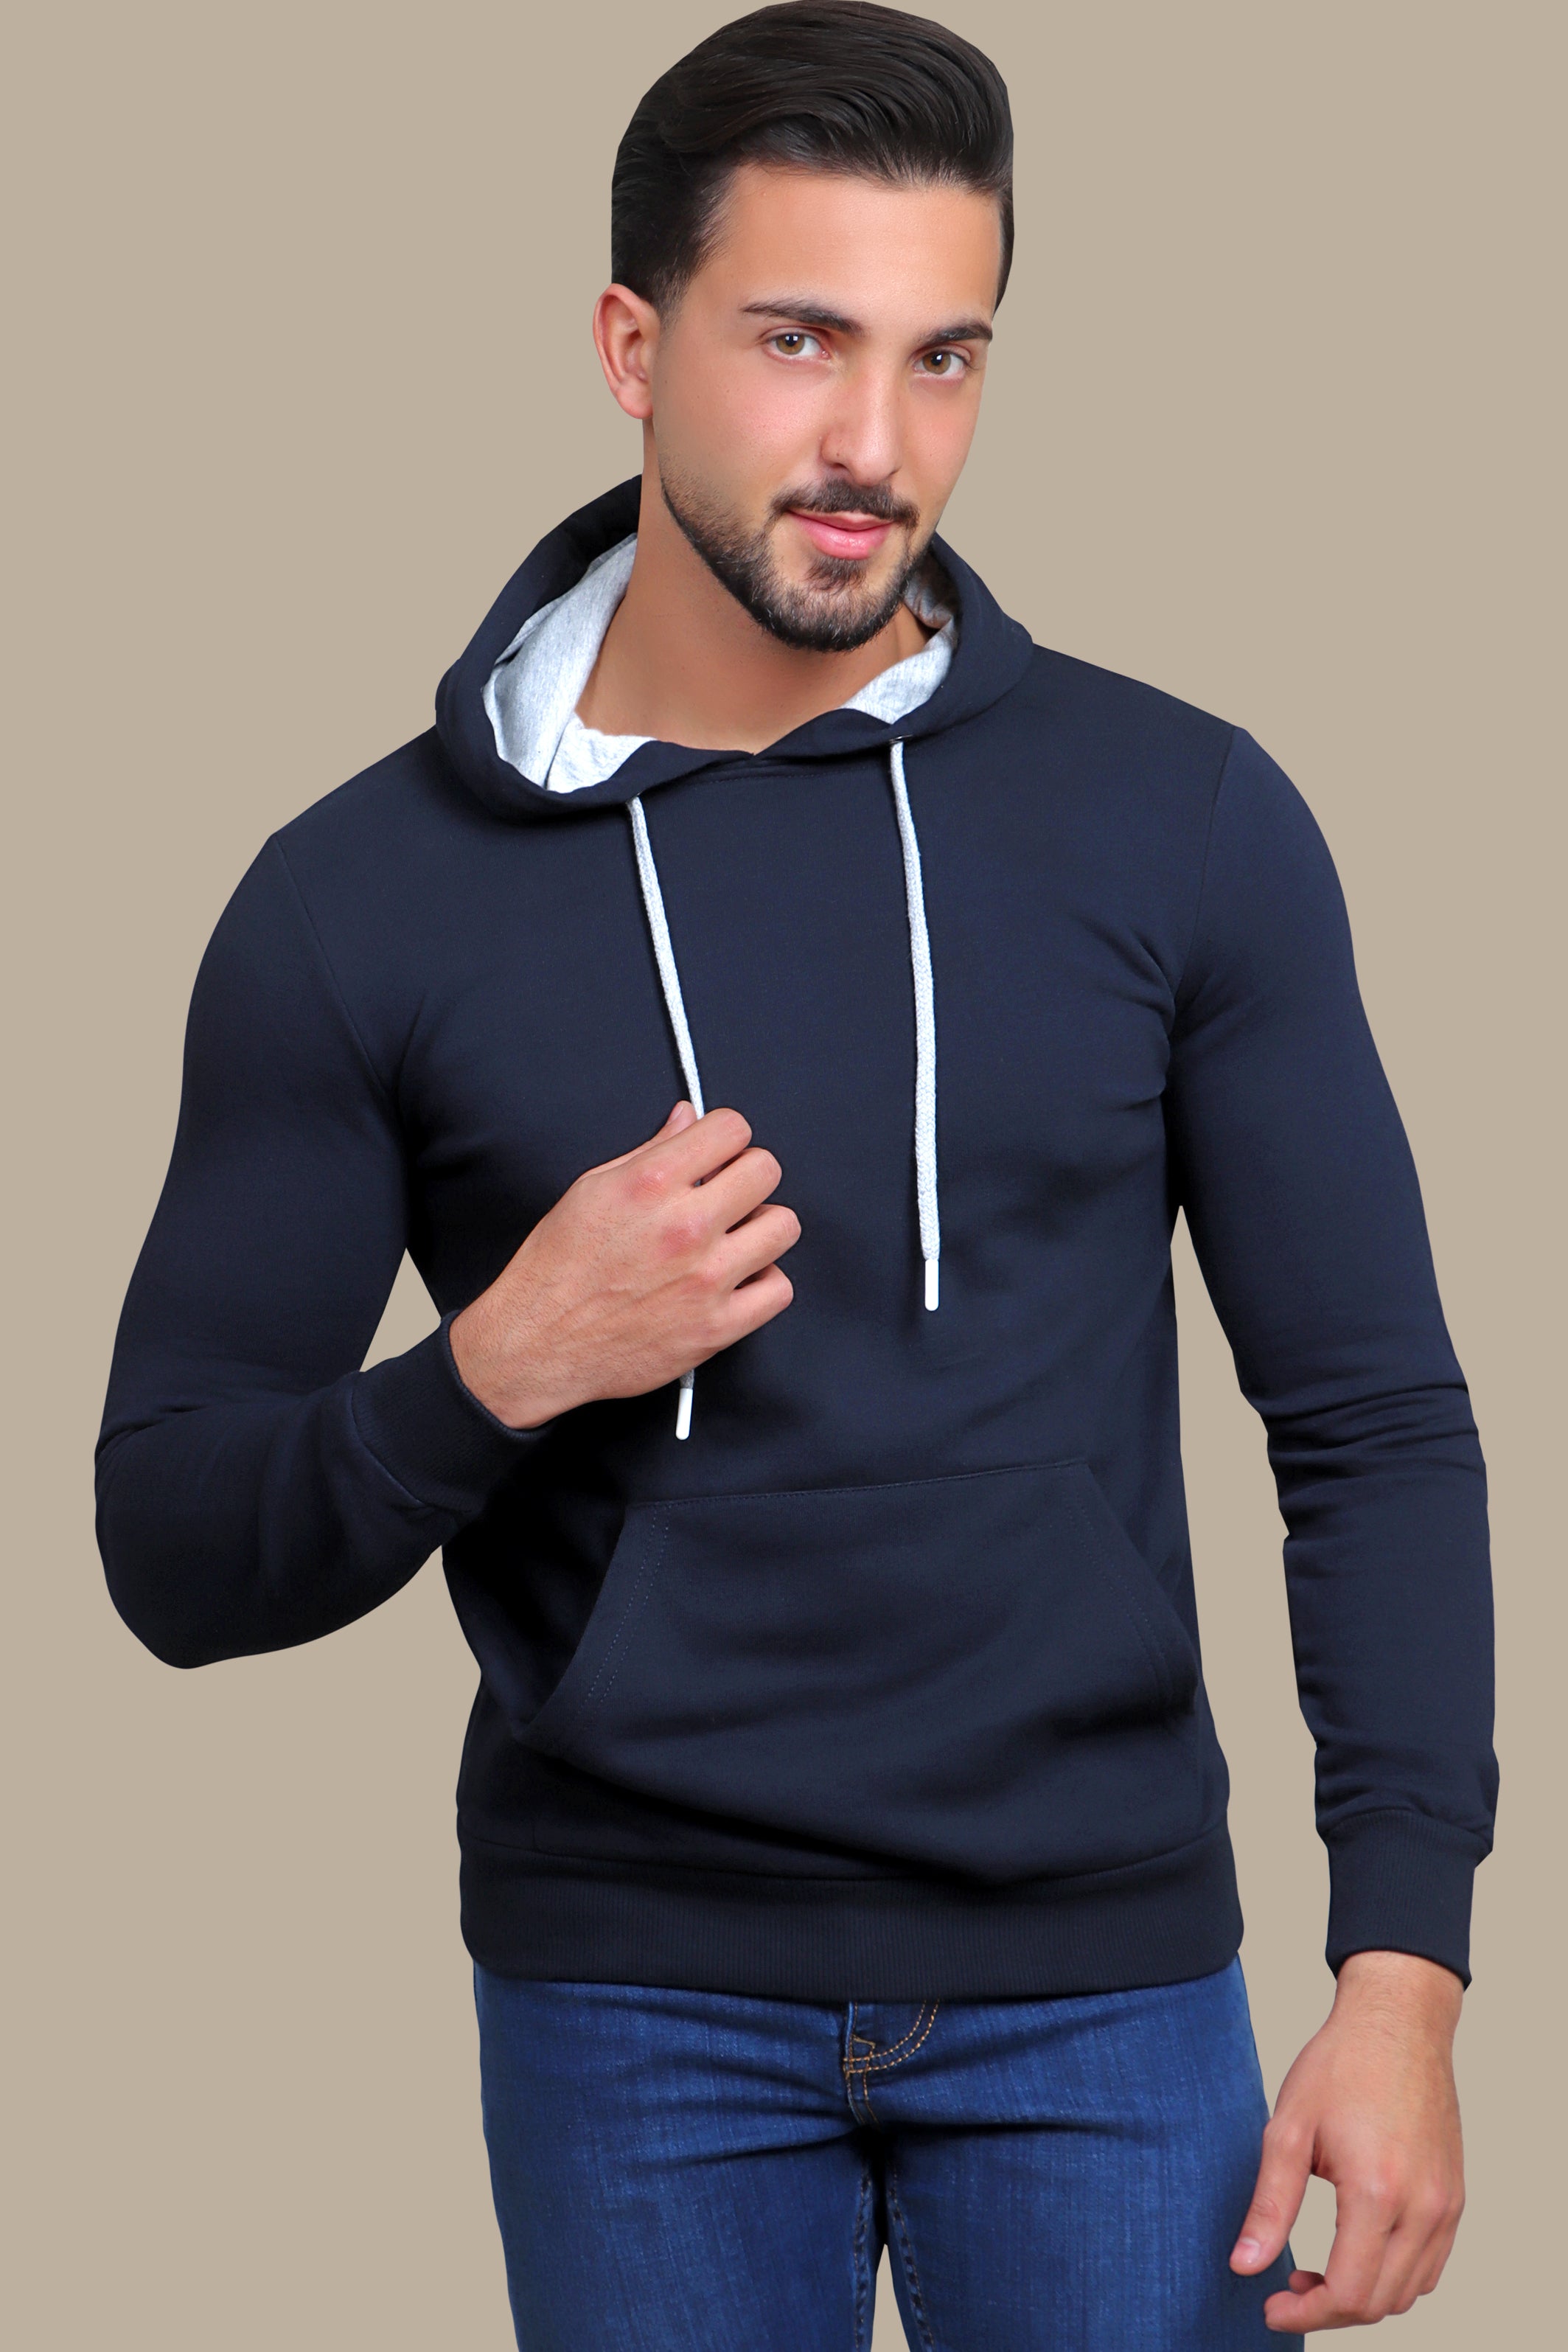 Nautical Ease: Navy Basic Hoodie for Casual Comfort